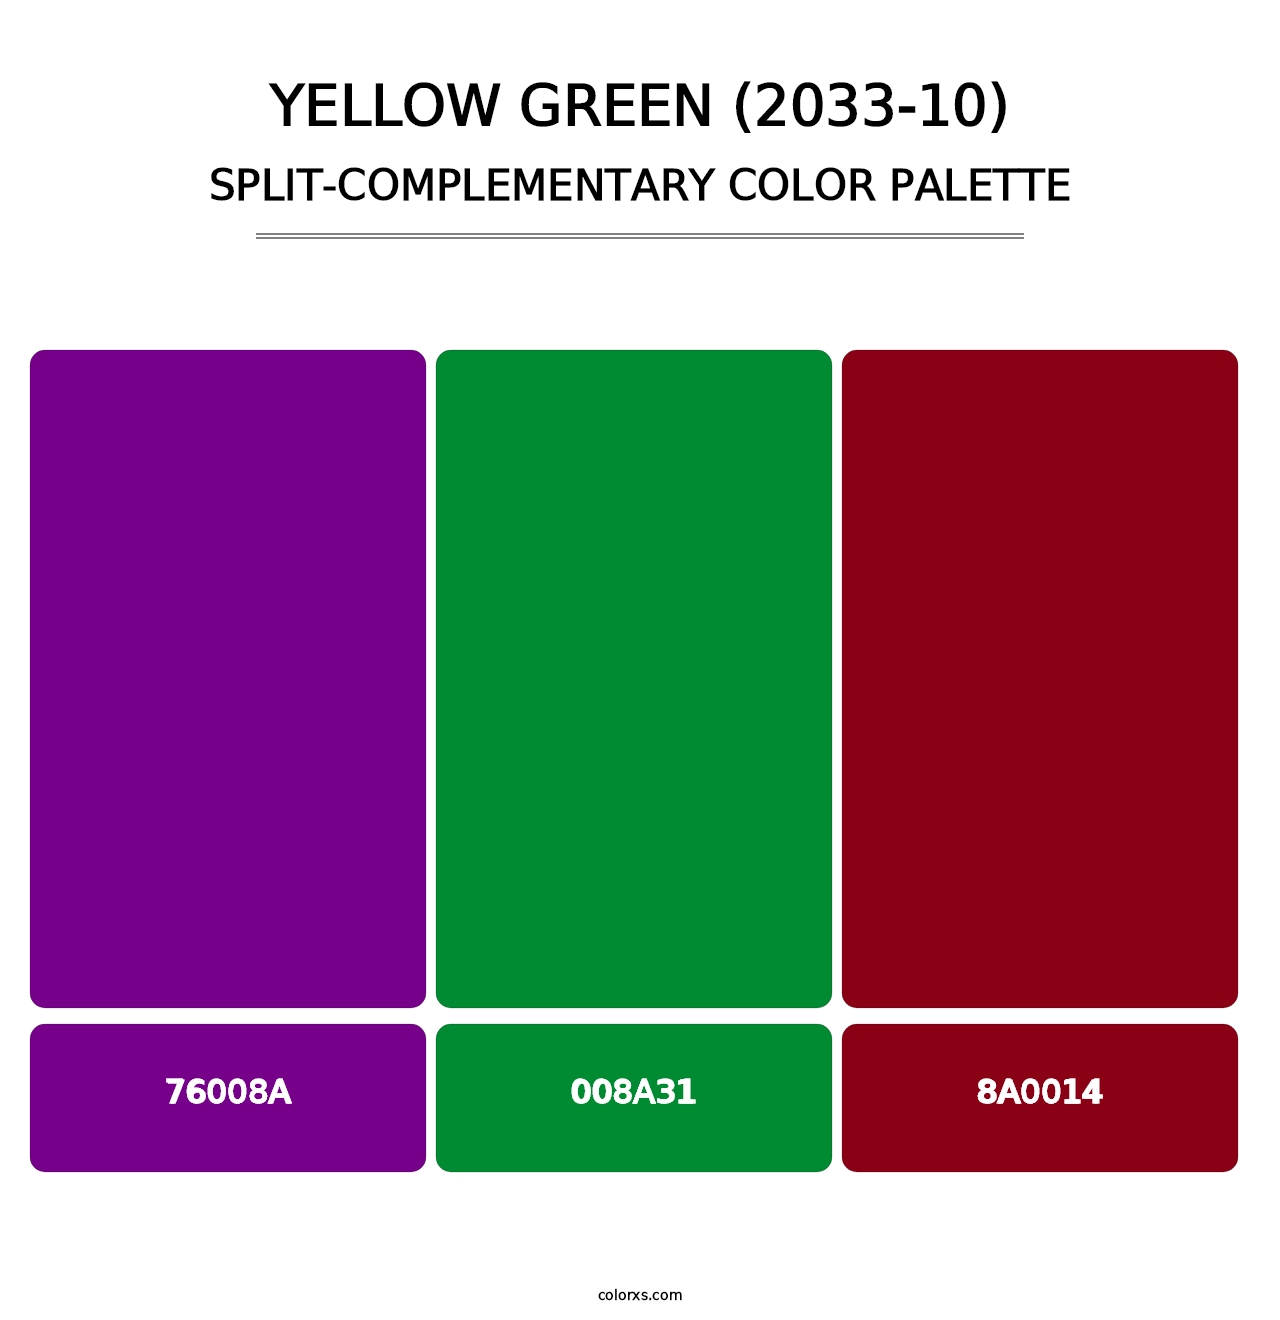 Yellow Green (2033-10) - Split-Complementary Color Palette